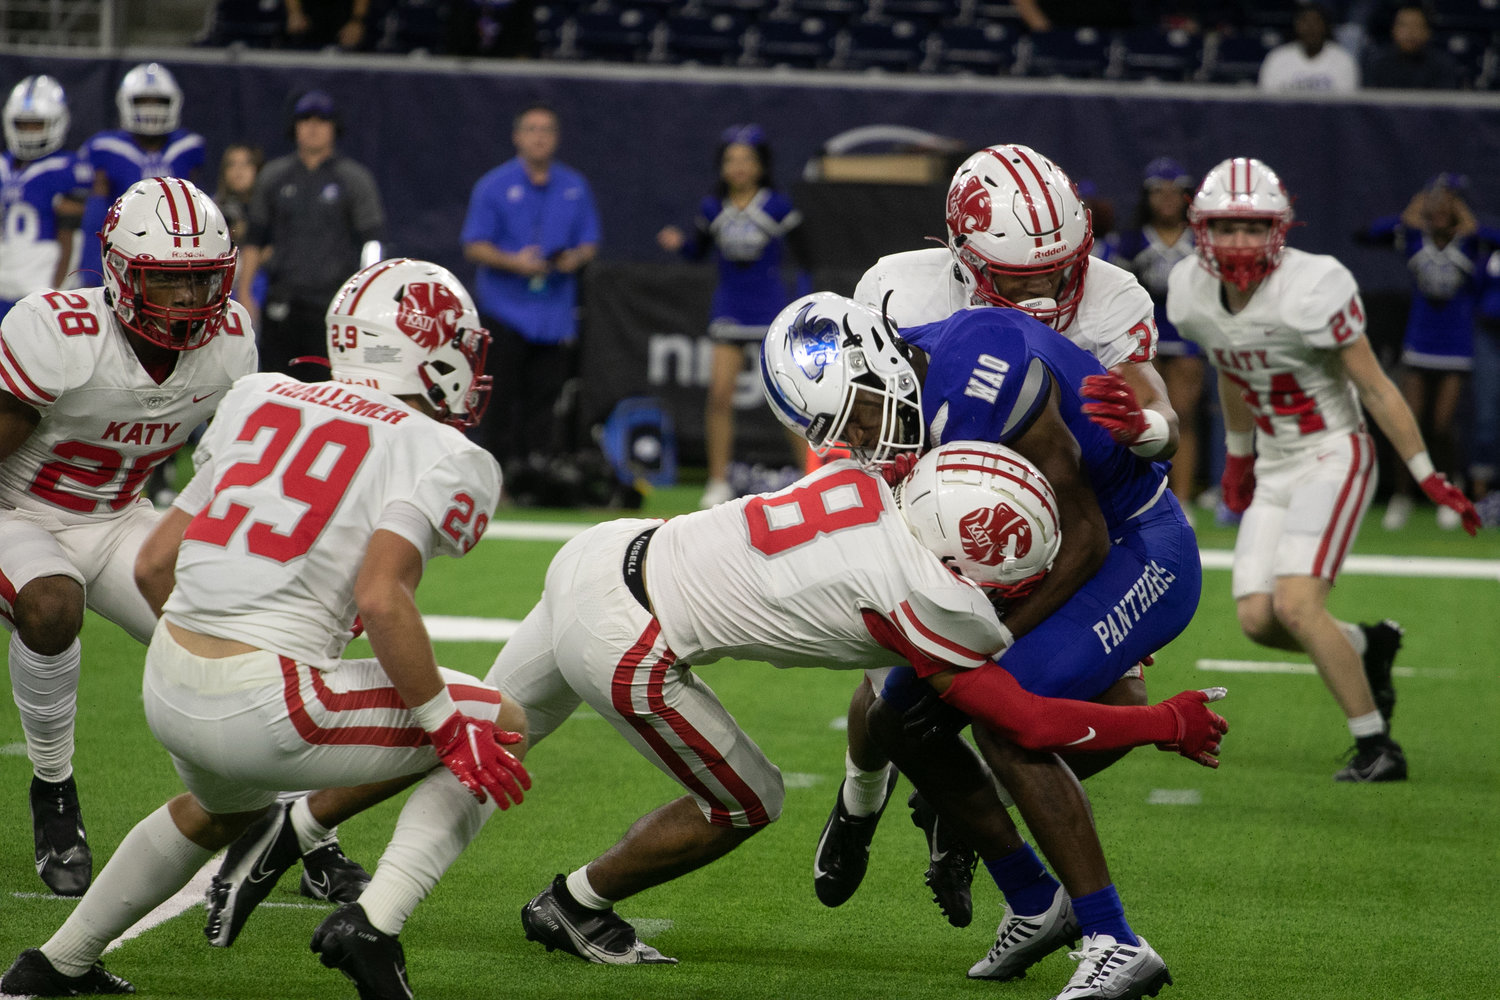 Katy players tackle a C.E. King player during Friday's Class 6A-Division II Region III Final between Katy and C.E. King at NRG Stadium.